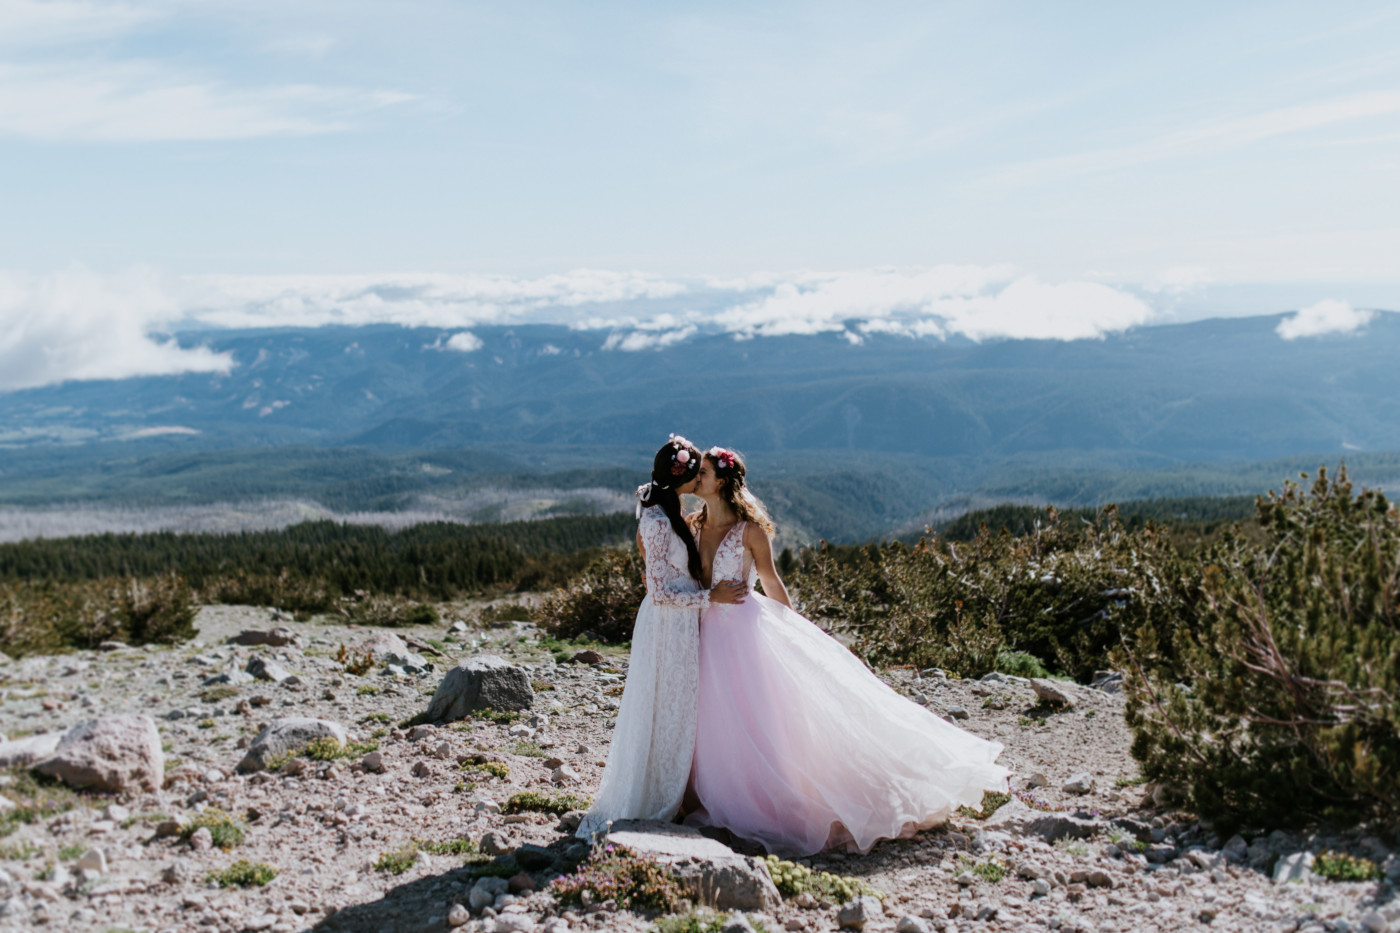 Margaux and Heather kiss. Elopement photography at Mount Hood by Sienna Plus Josh.